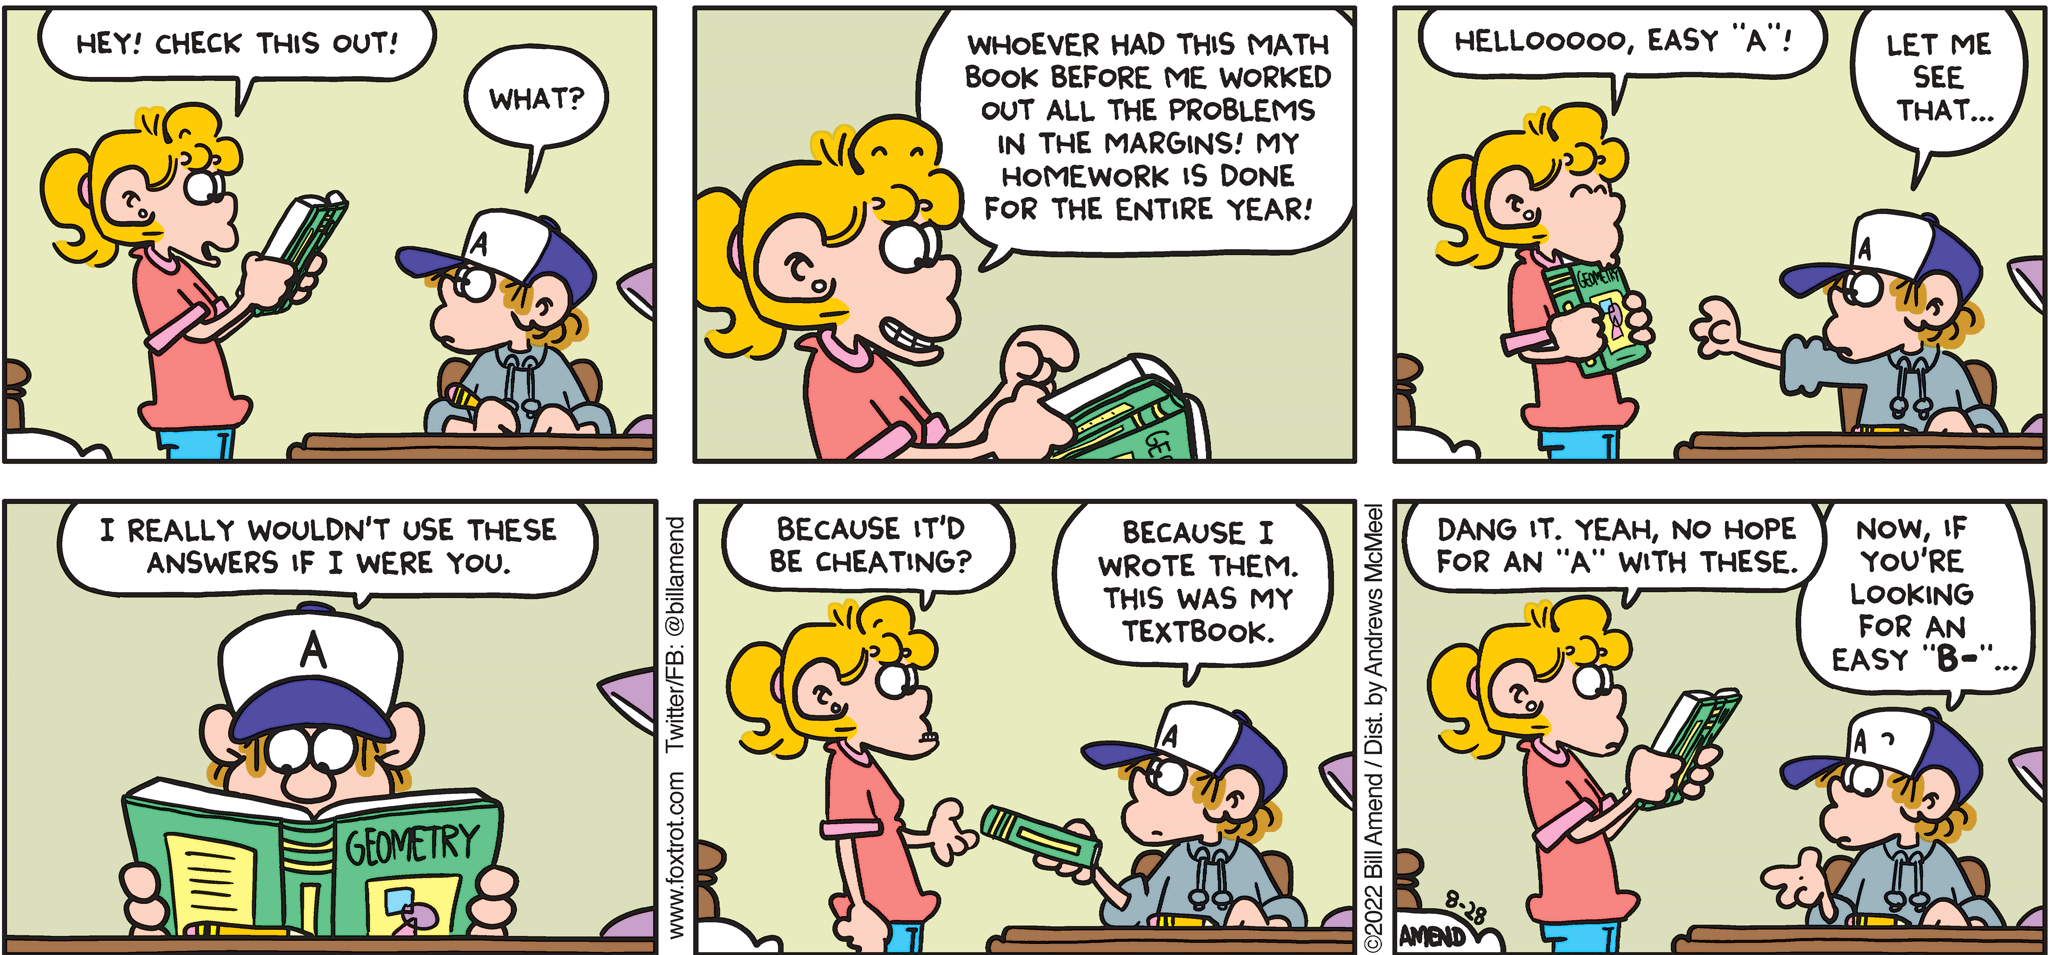 FoxTrot comic strip by Bill Amend - "Easy B-" published August 28, 2022 - Transcript: Paige Fox: Hey! Check this out! Peter Fox: What? Paige Fox: Whoever had this math book before me worked out all the problems in the margins! My homework is done for the year! Hellooooo, easy "A"! Peter Fox: Let me see that... Peter Fox: I really wouldn't use these answers if I were you. Paige Fox: Because it'd be cheating? Peter Fox: Because I wrote them. This was my textbook. Paige Fox: Dang it. Yeah, no hope for an "A" with these. Peter Fox: Now, if you're looking for an easy "B-" ...